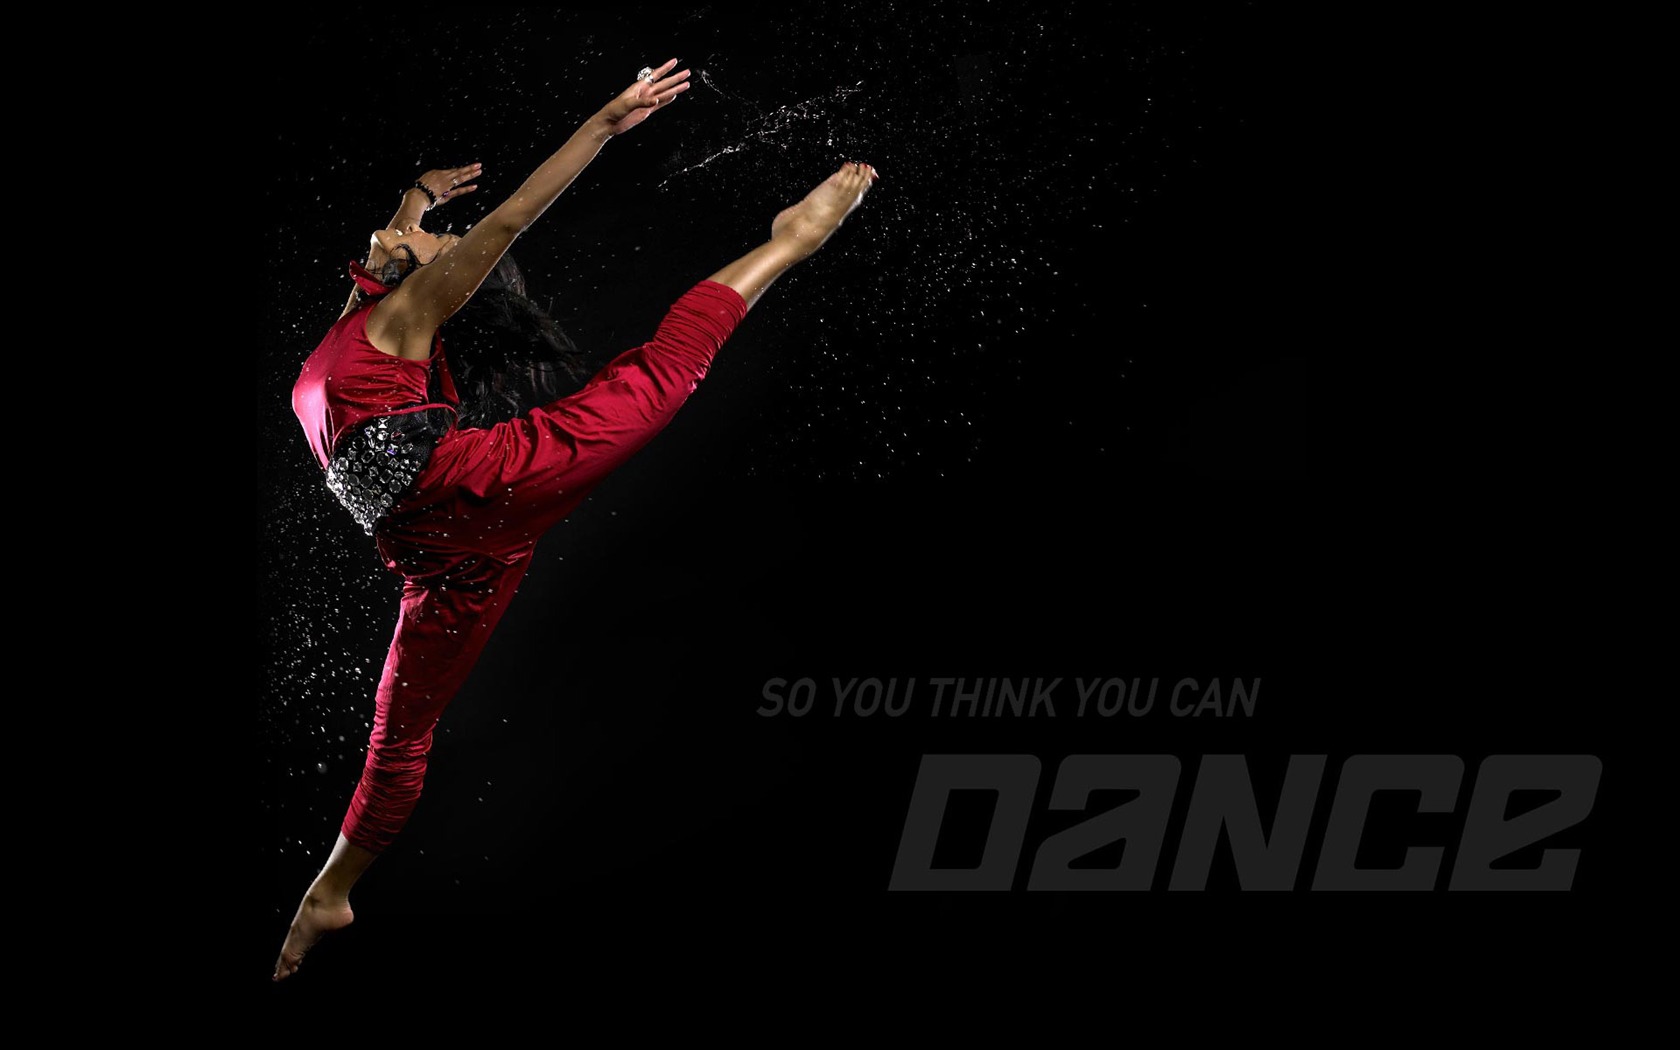 So You Think You Can Dance Wallpaper (1) #9 - 1680x1050